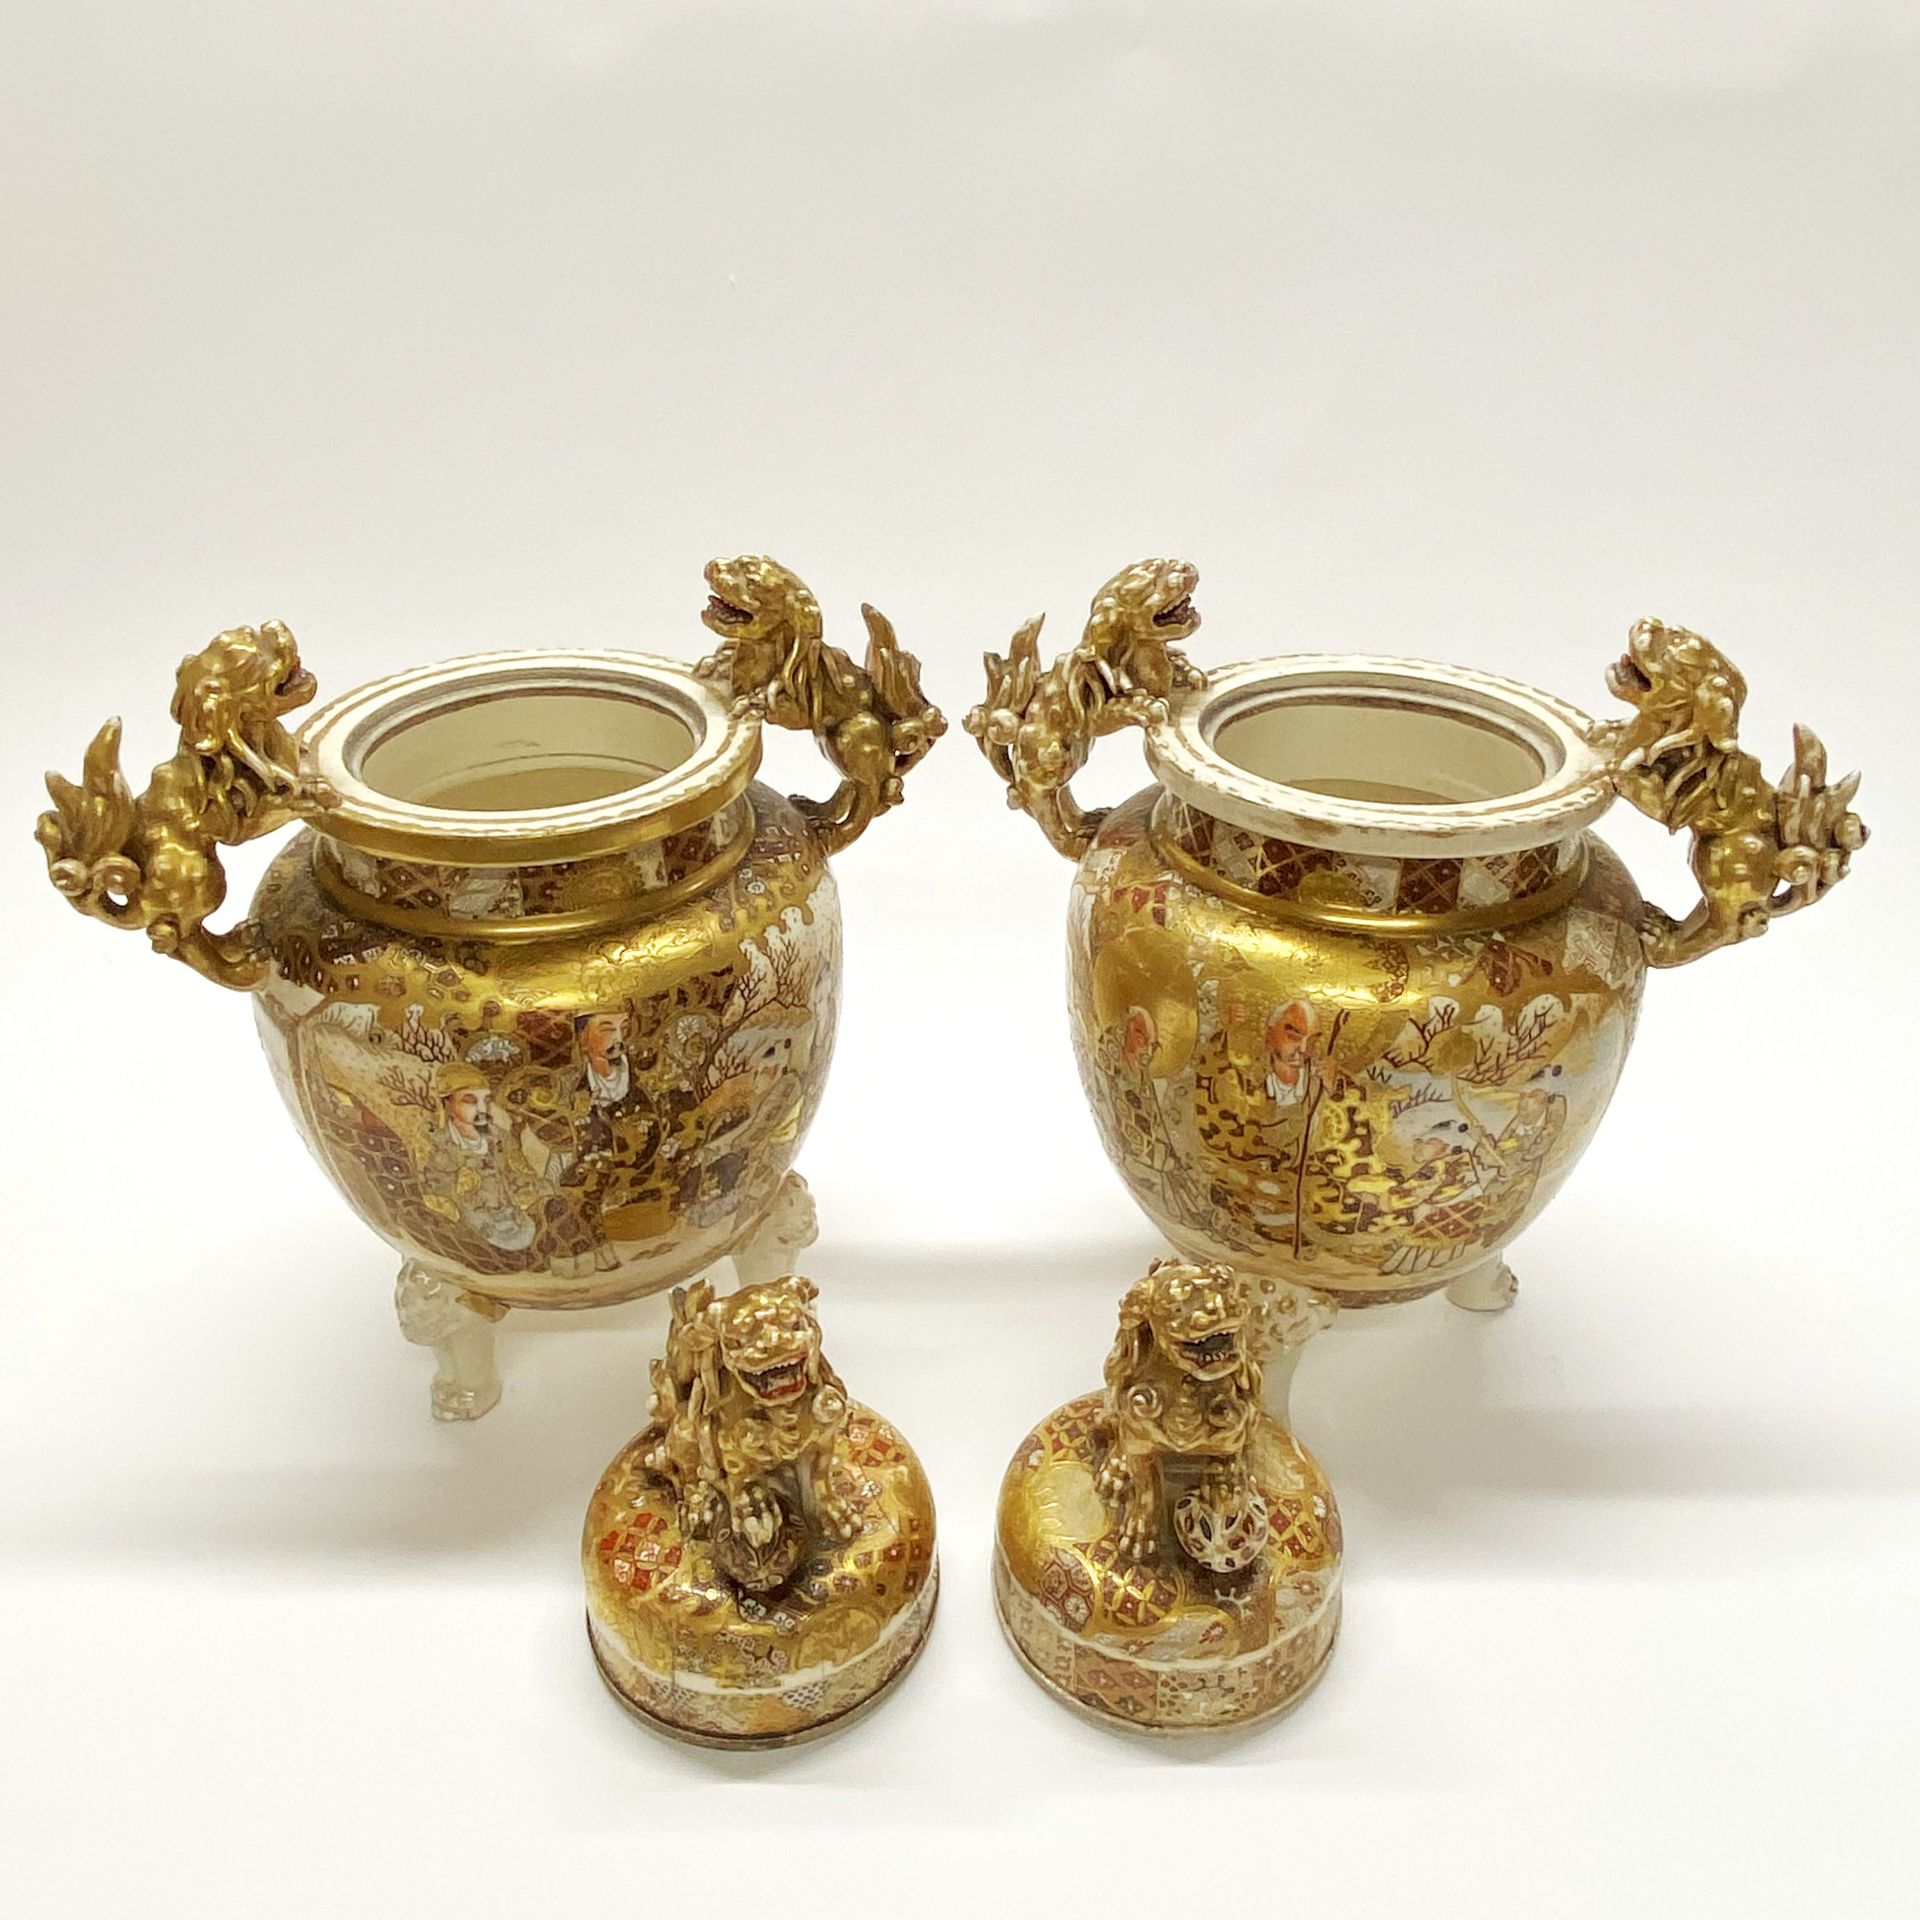 A pair of 19thC Japanese gilt porcelain koros. H. 39cm (repair to one lid) - Image 3 of 4